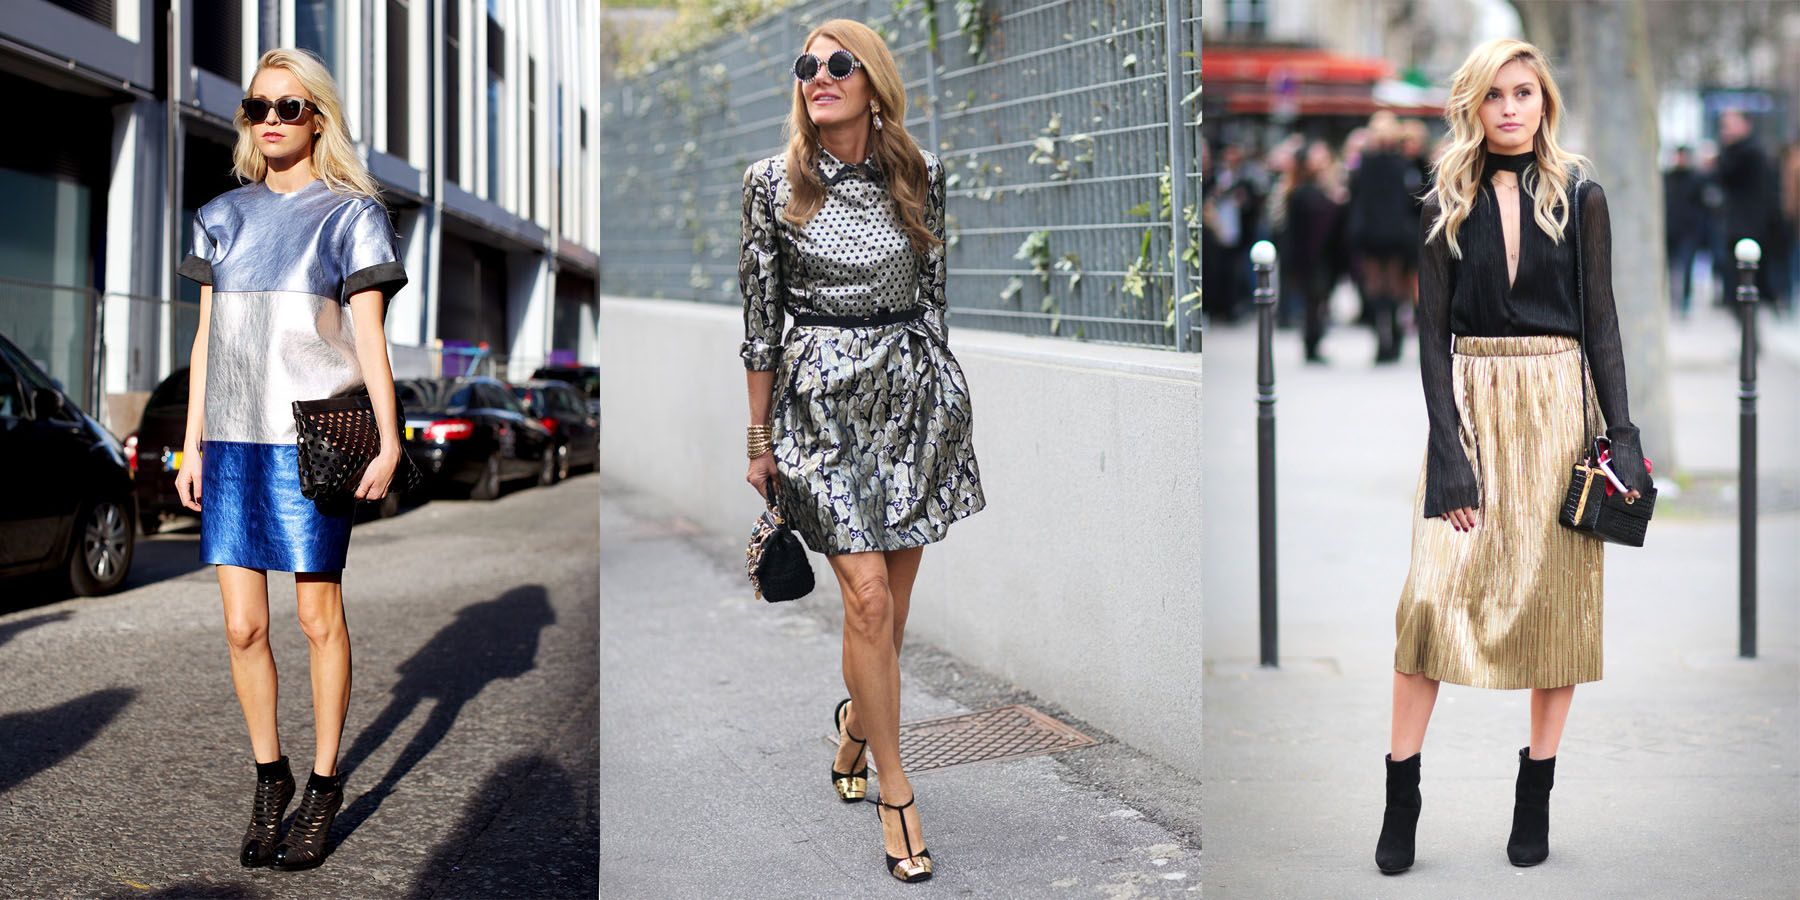 Metallic Touch Inspiration for Your Everyday Style